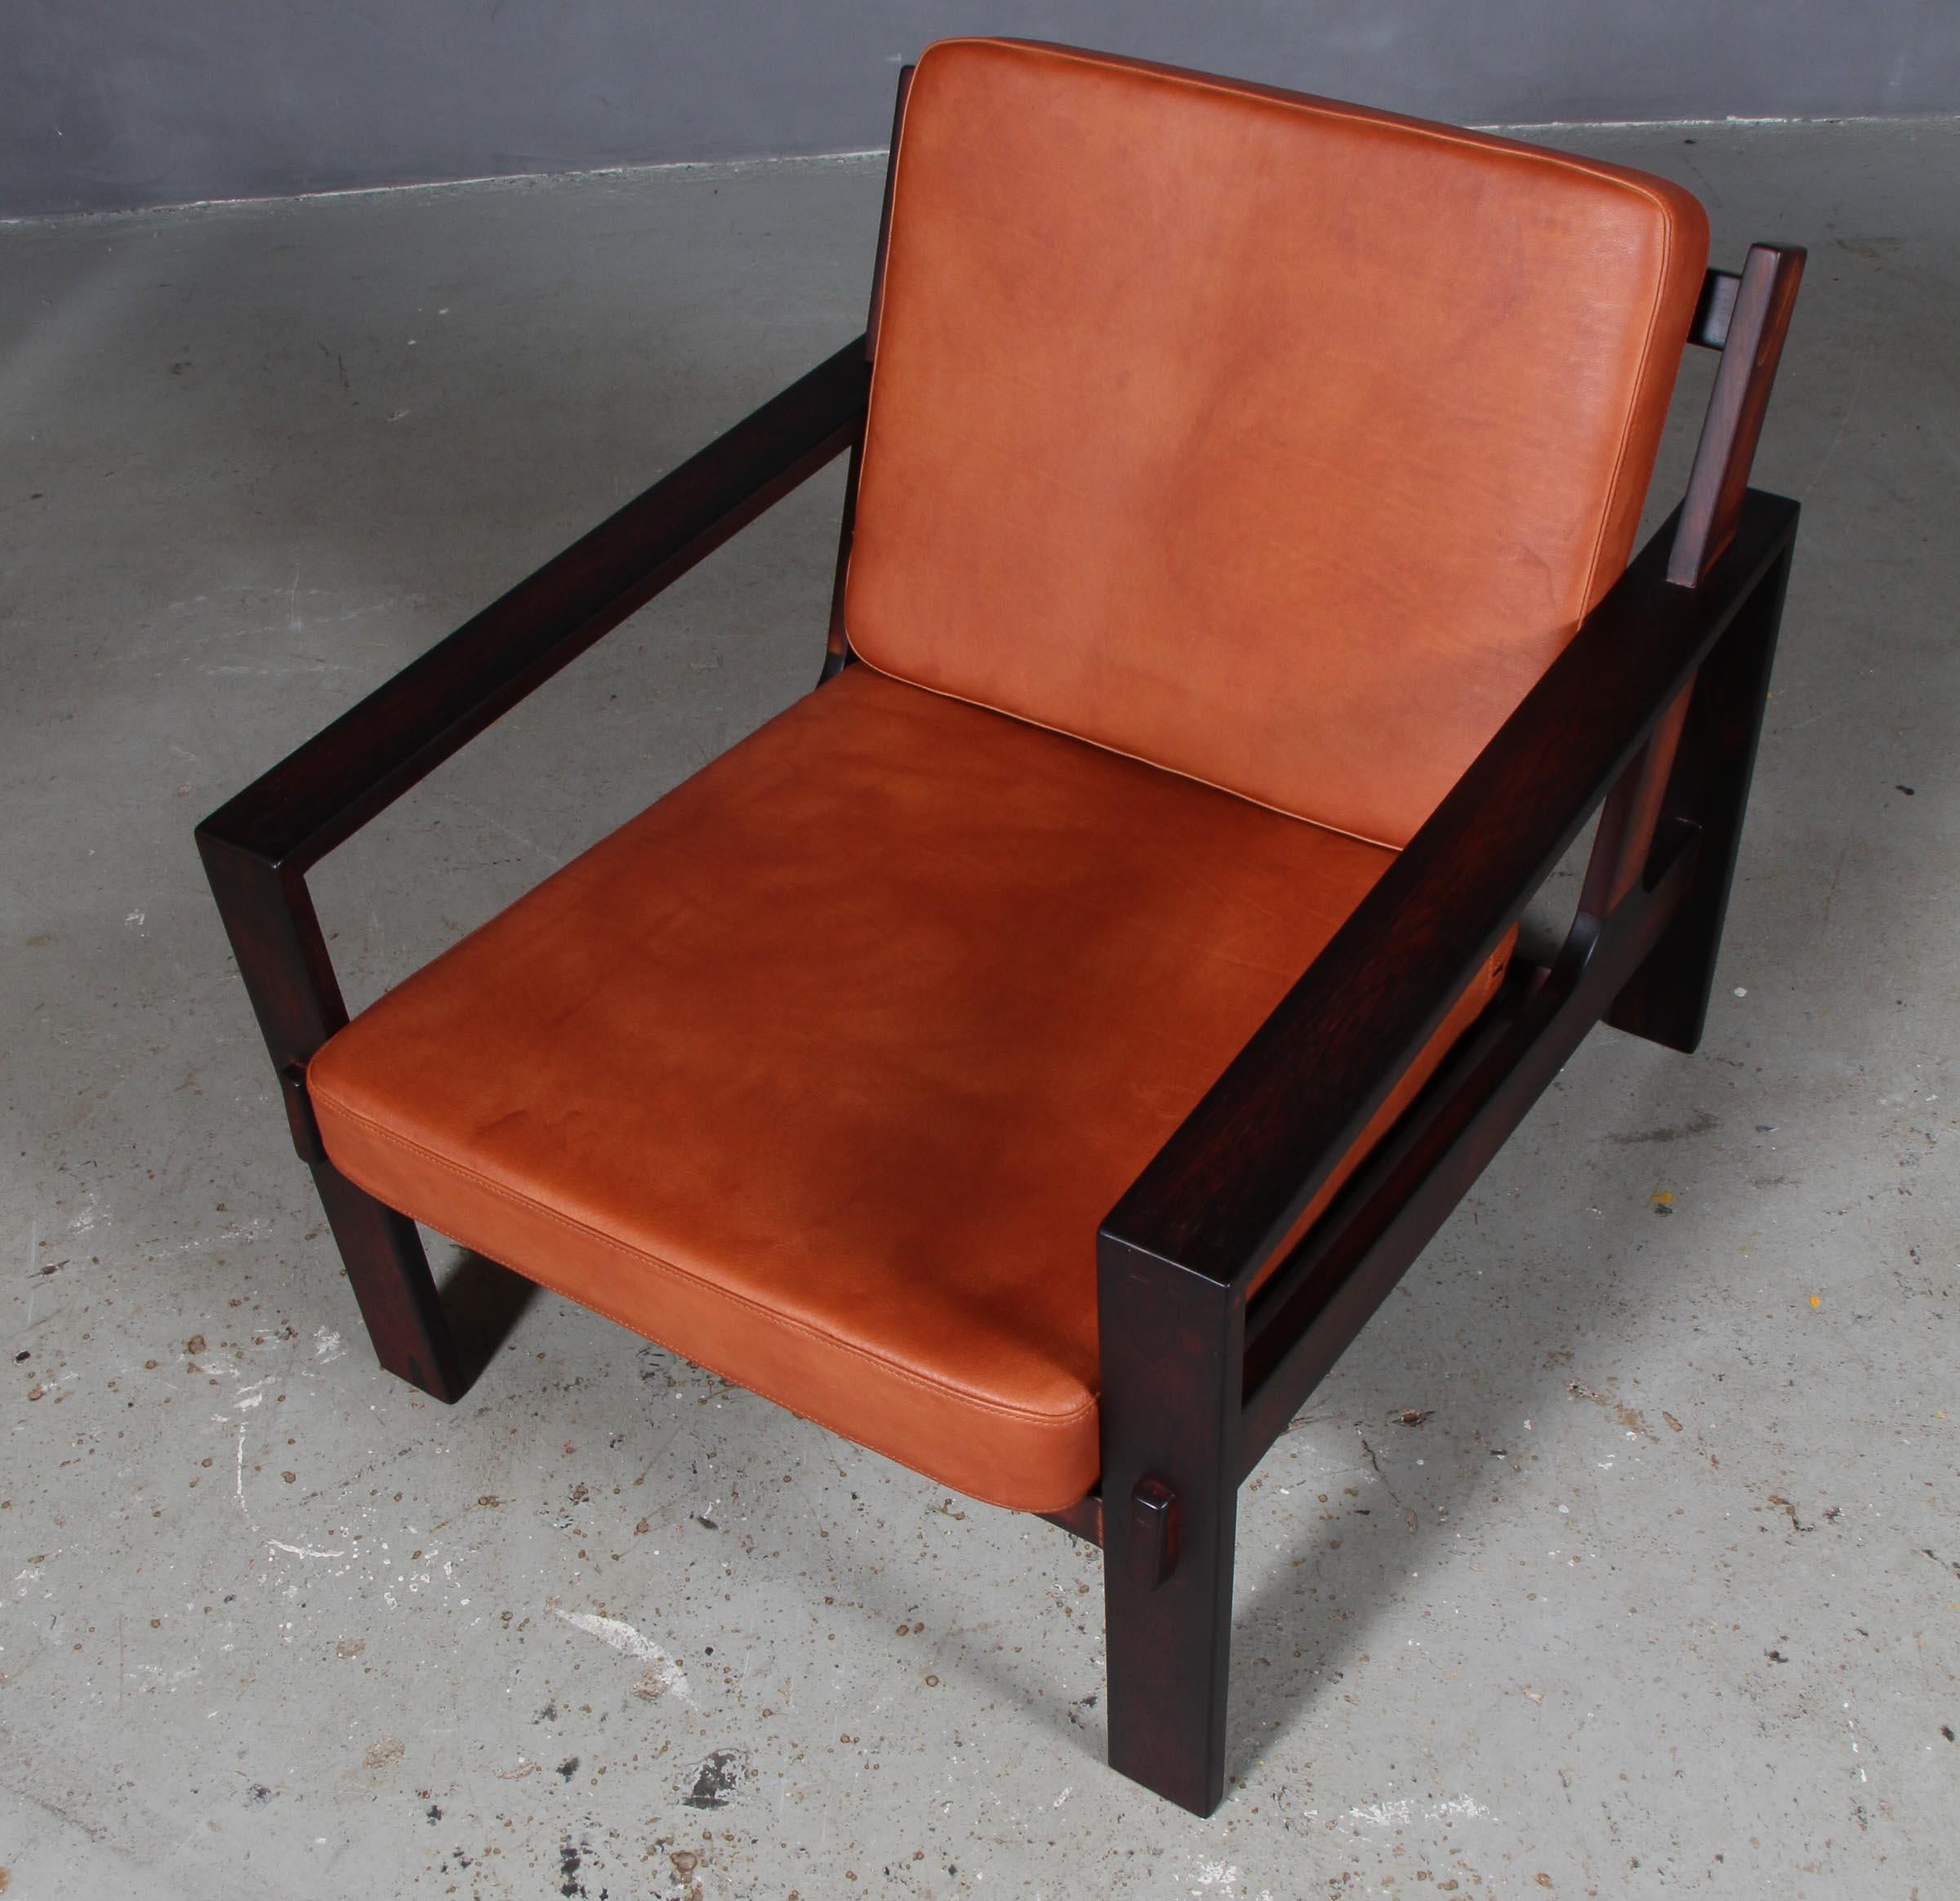 Leather Lounge Chair by Esko Pajamies for Asko, Finland, 1970s